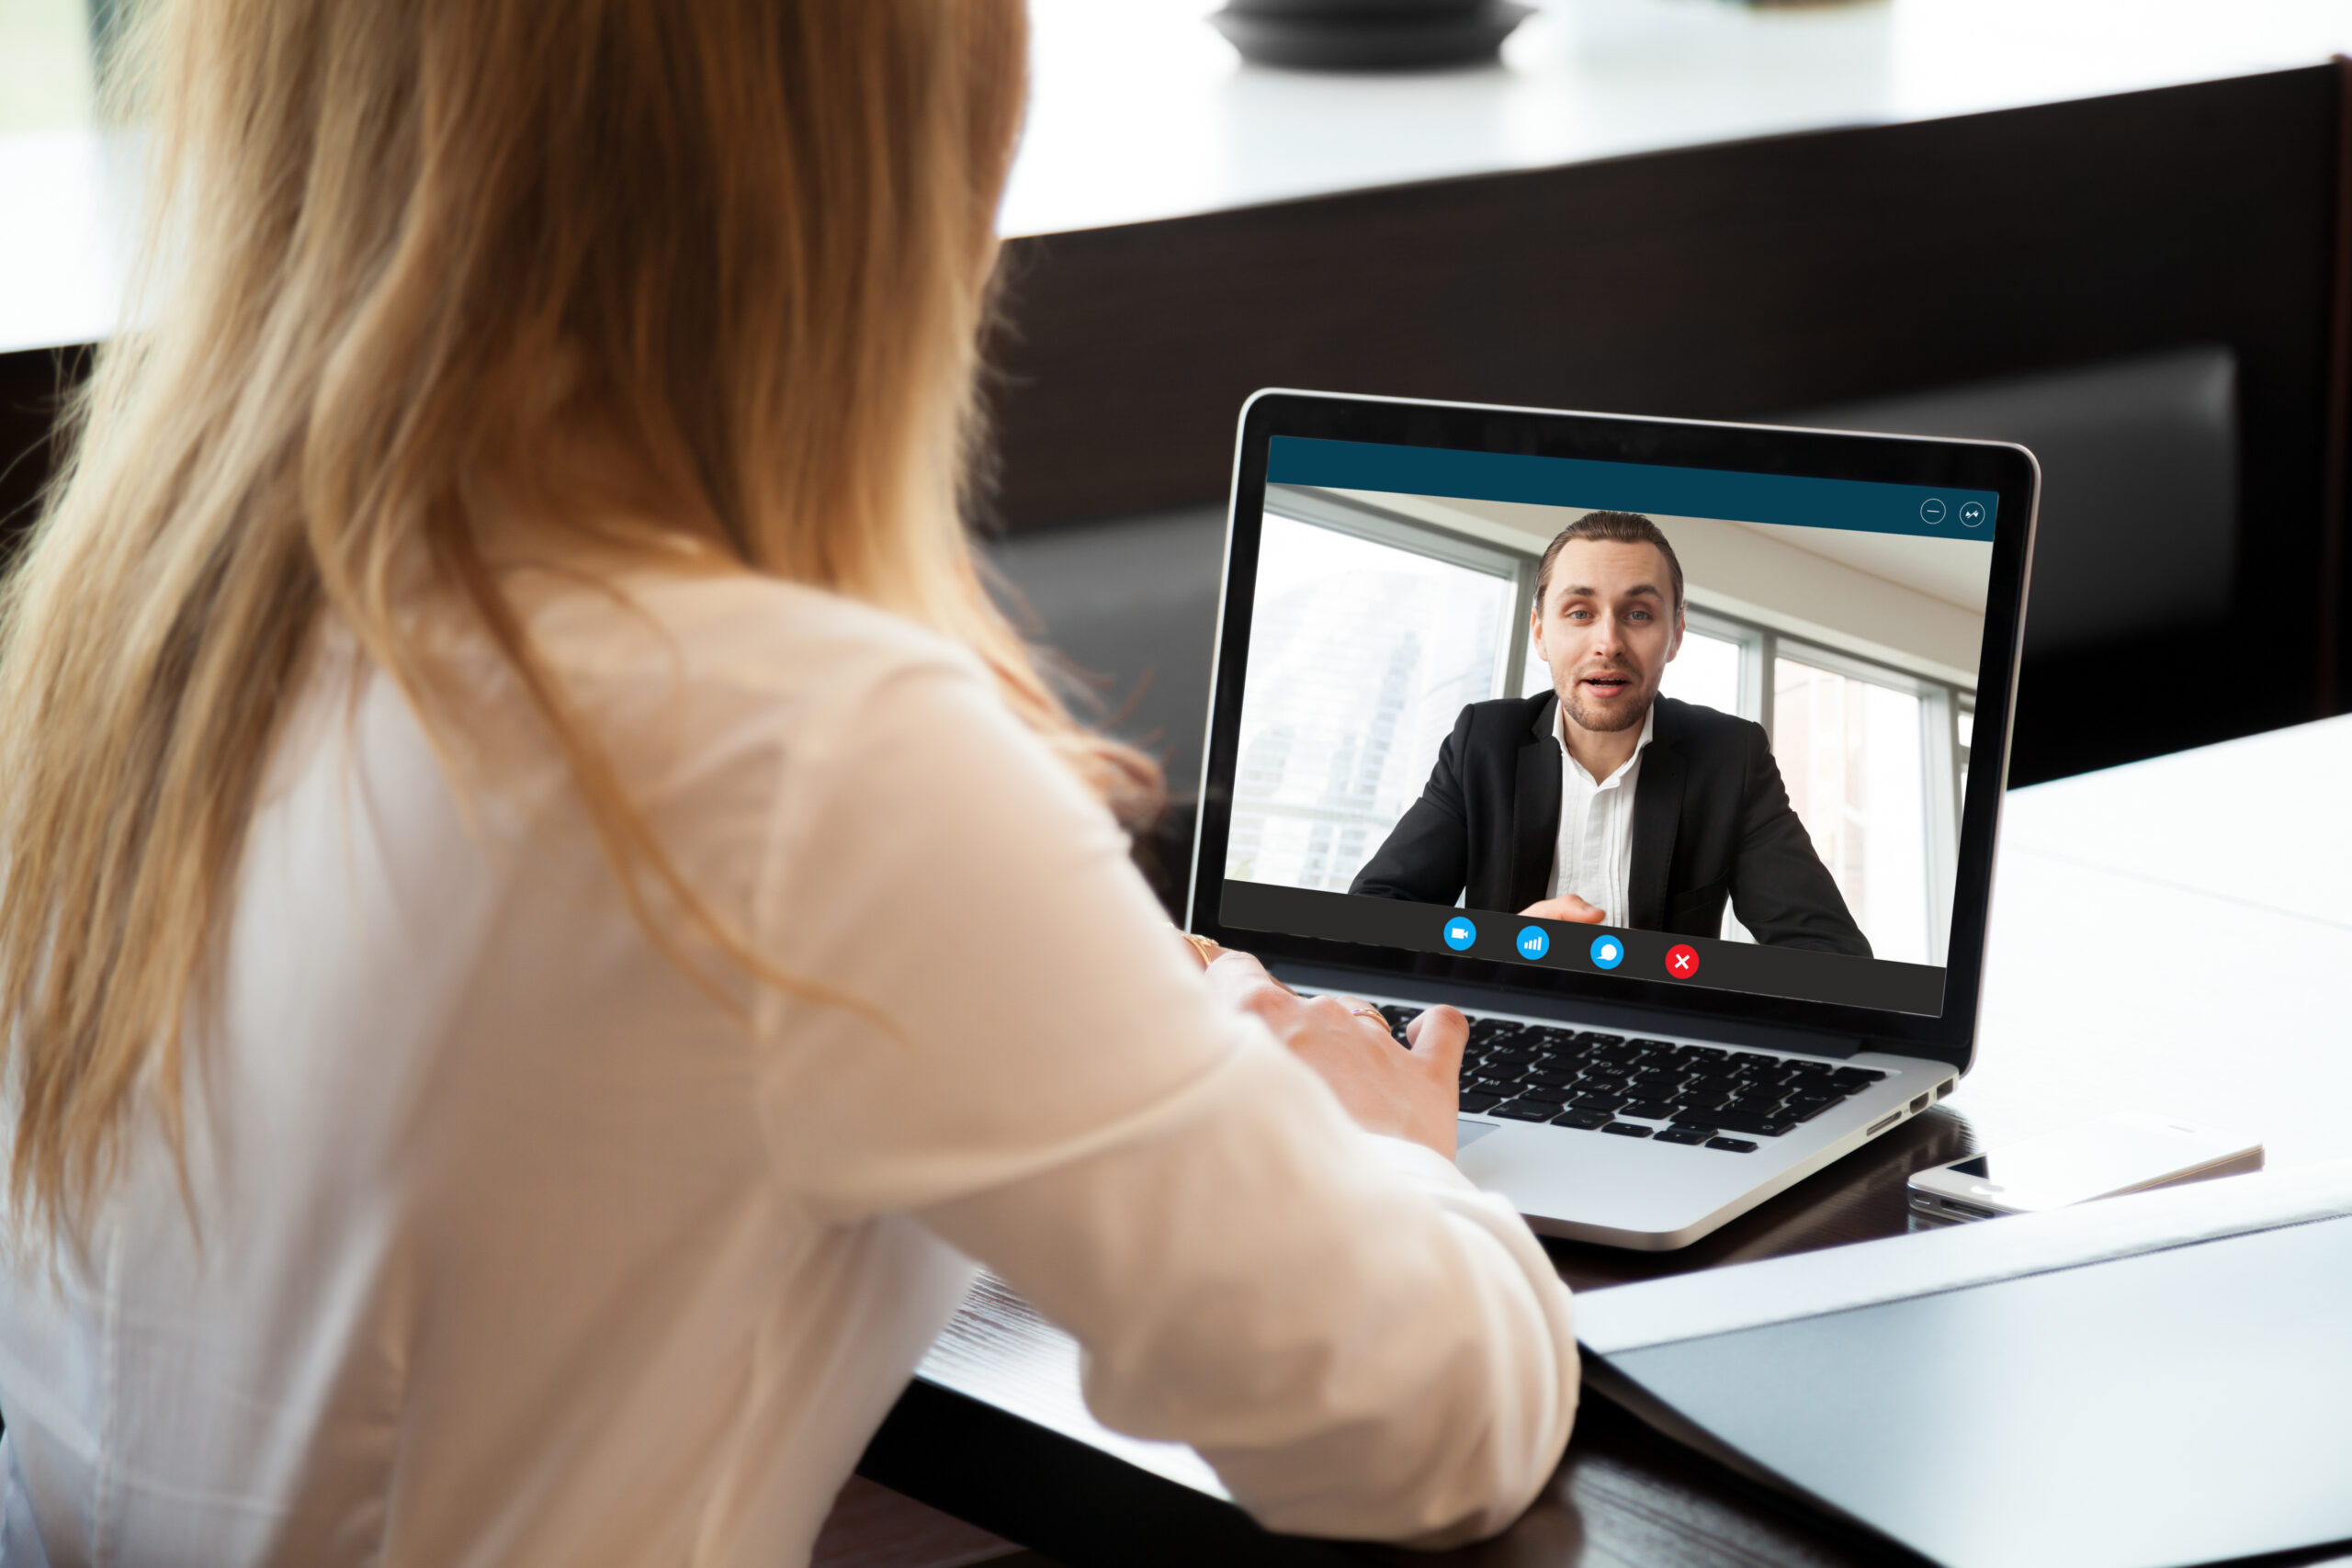 A female person, video conferencing a make person. The image shows the back of her head and back, and shows his image on her laptop.